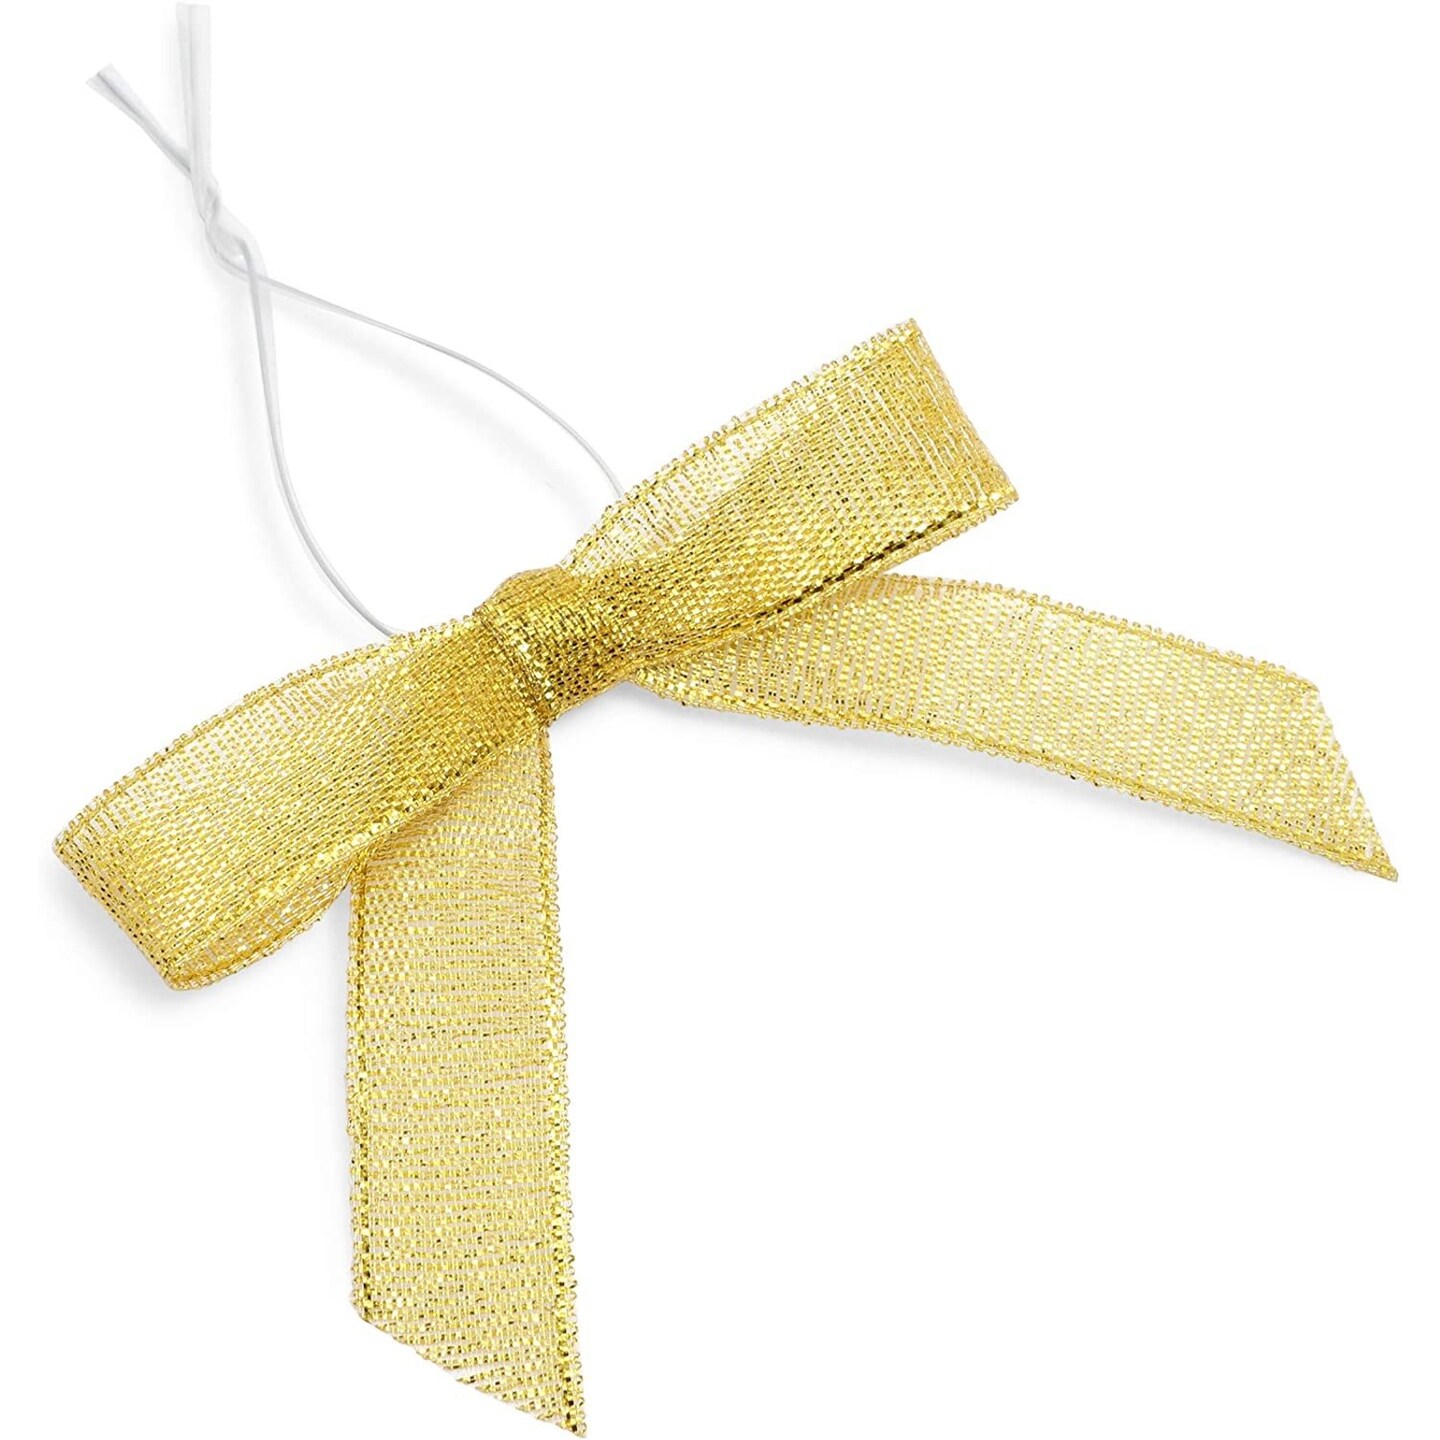 100-Pack Twist Tie Bows, Metallic Gold Pre-Tied Satin Ribbon for Gift Wrap Bags Boxes, Party Favors, Baked Goods, Crafts, Mini Bowties for Hair Decorations (2.5x3 in)